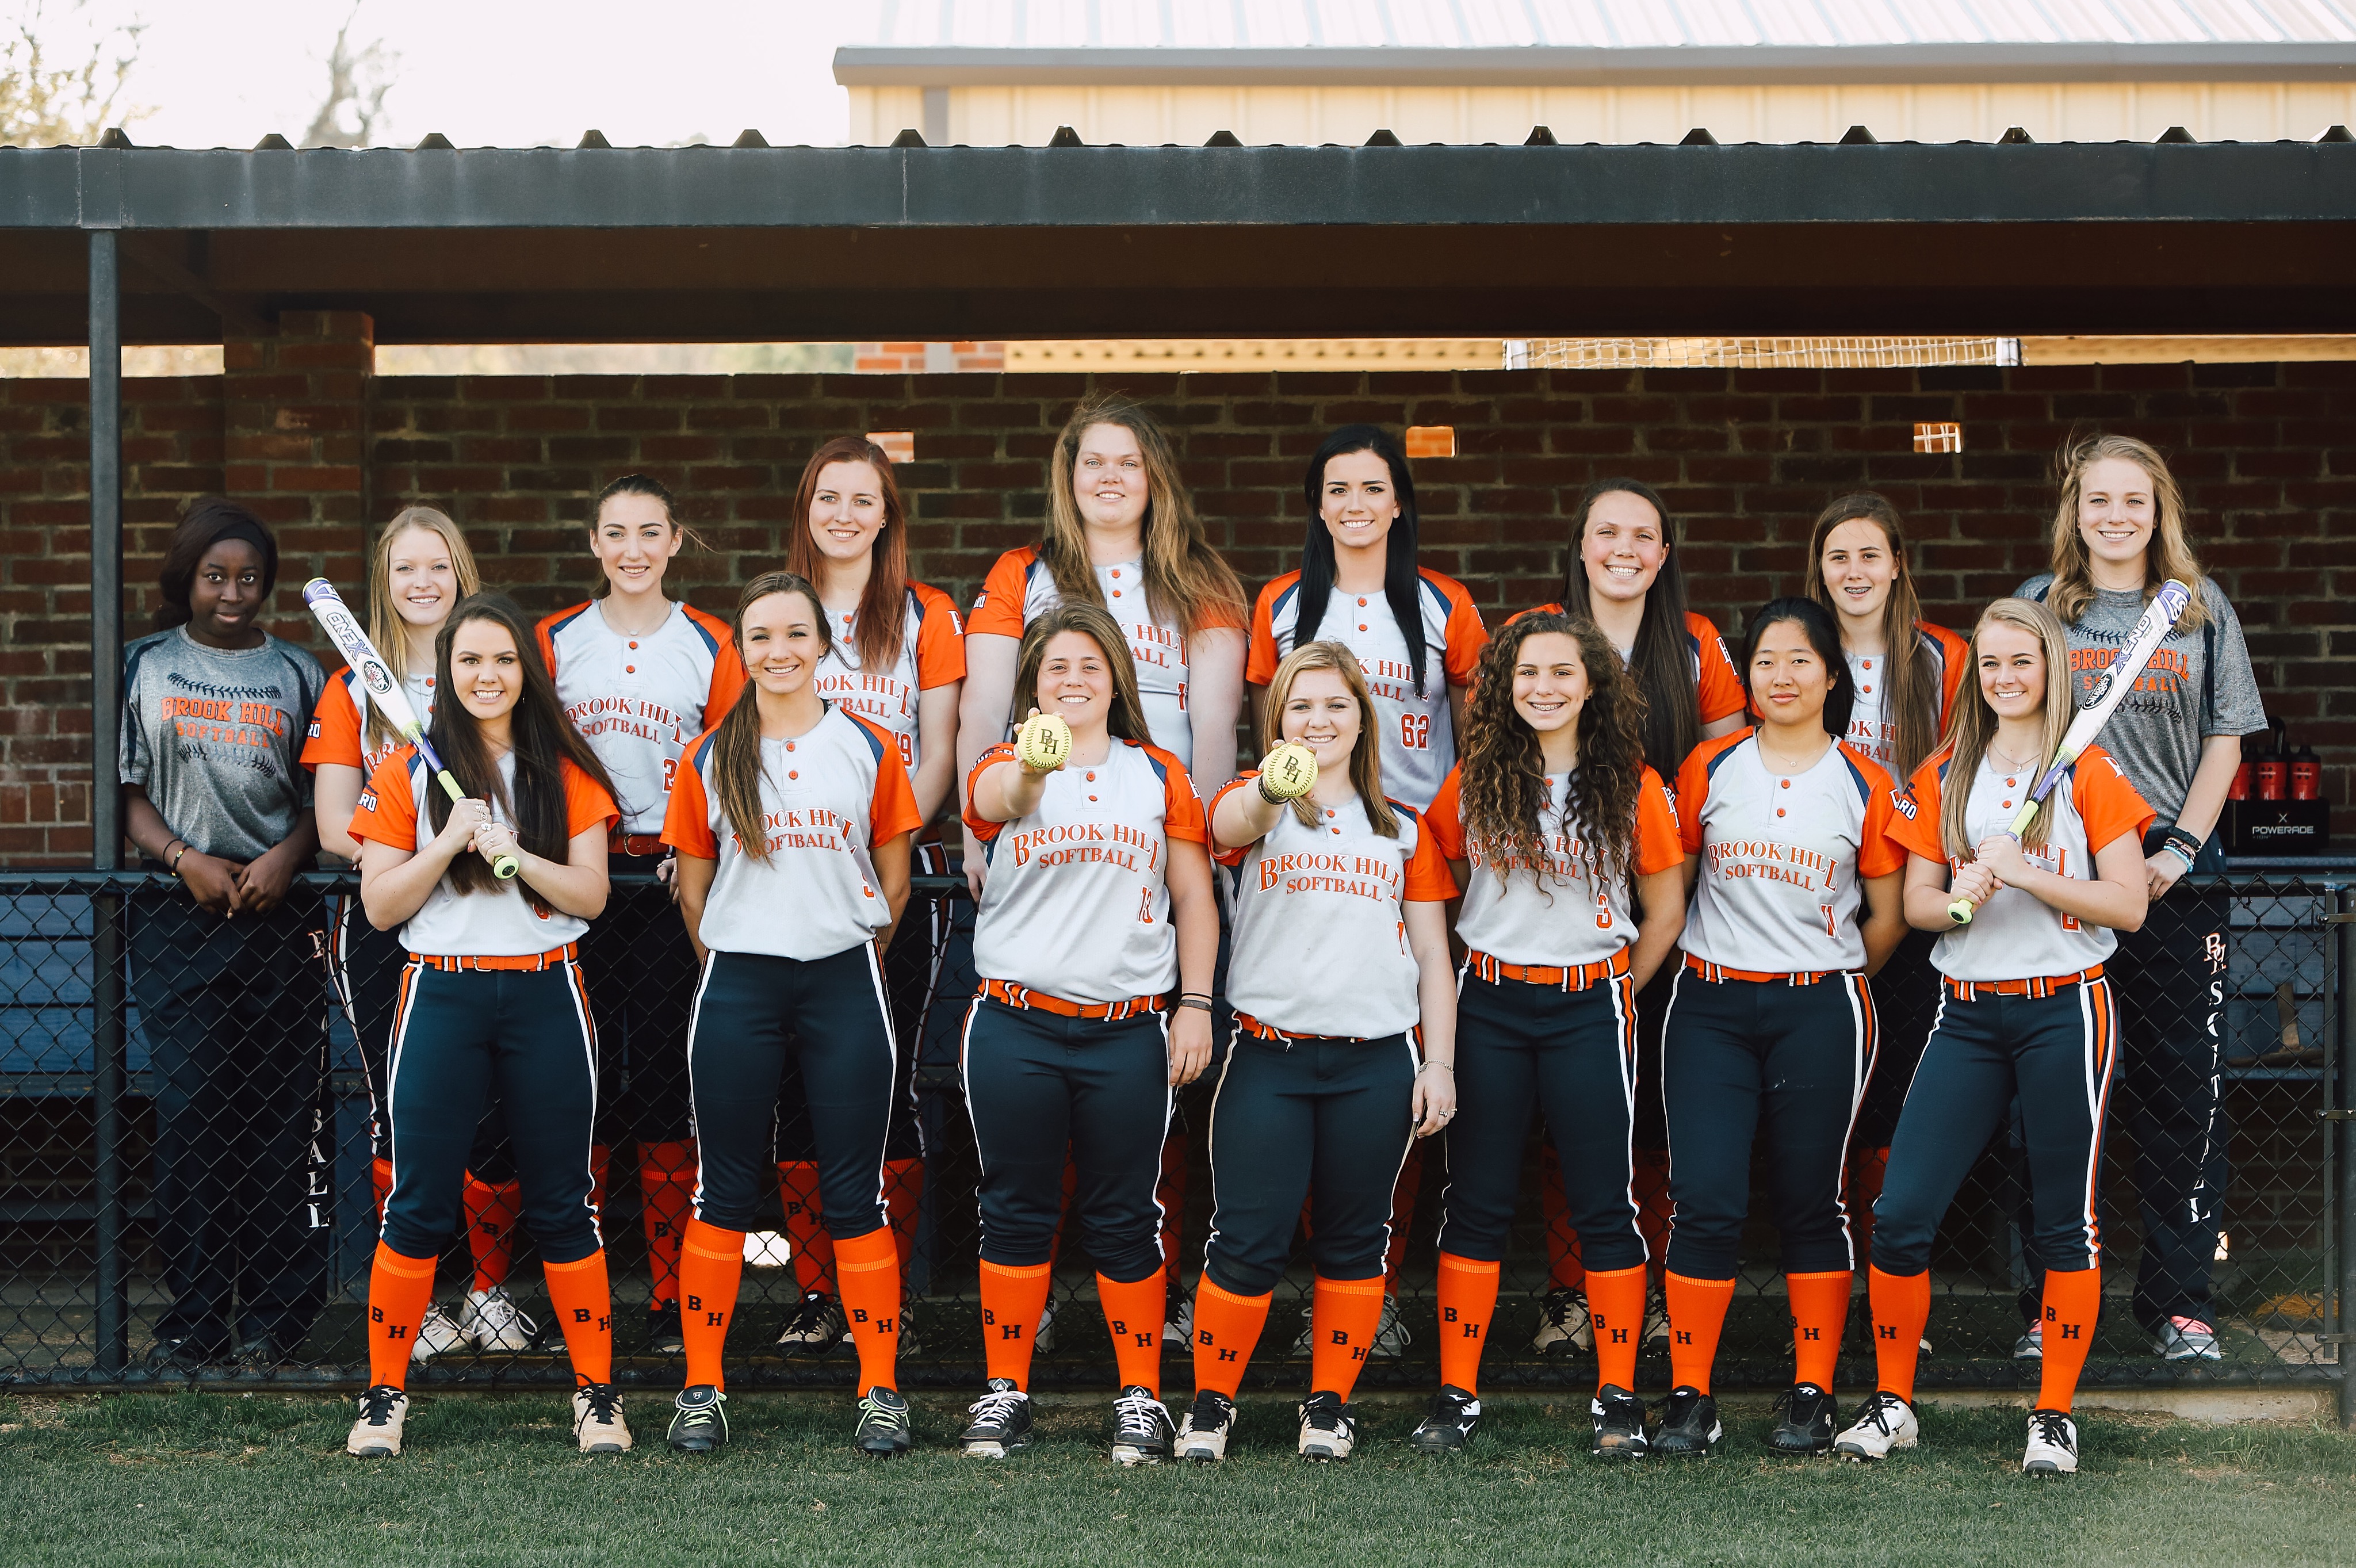 Brook Hill softball team photo (going to state!)